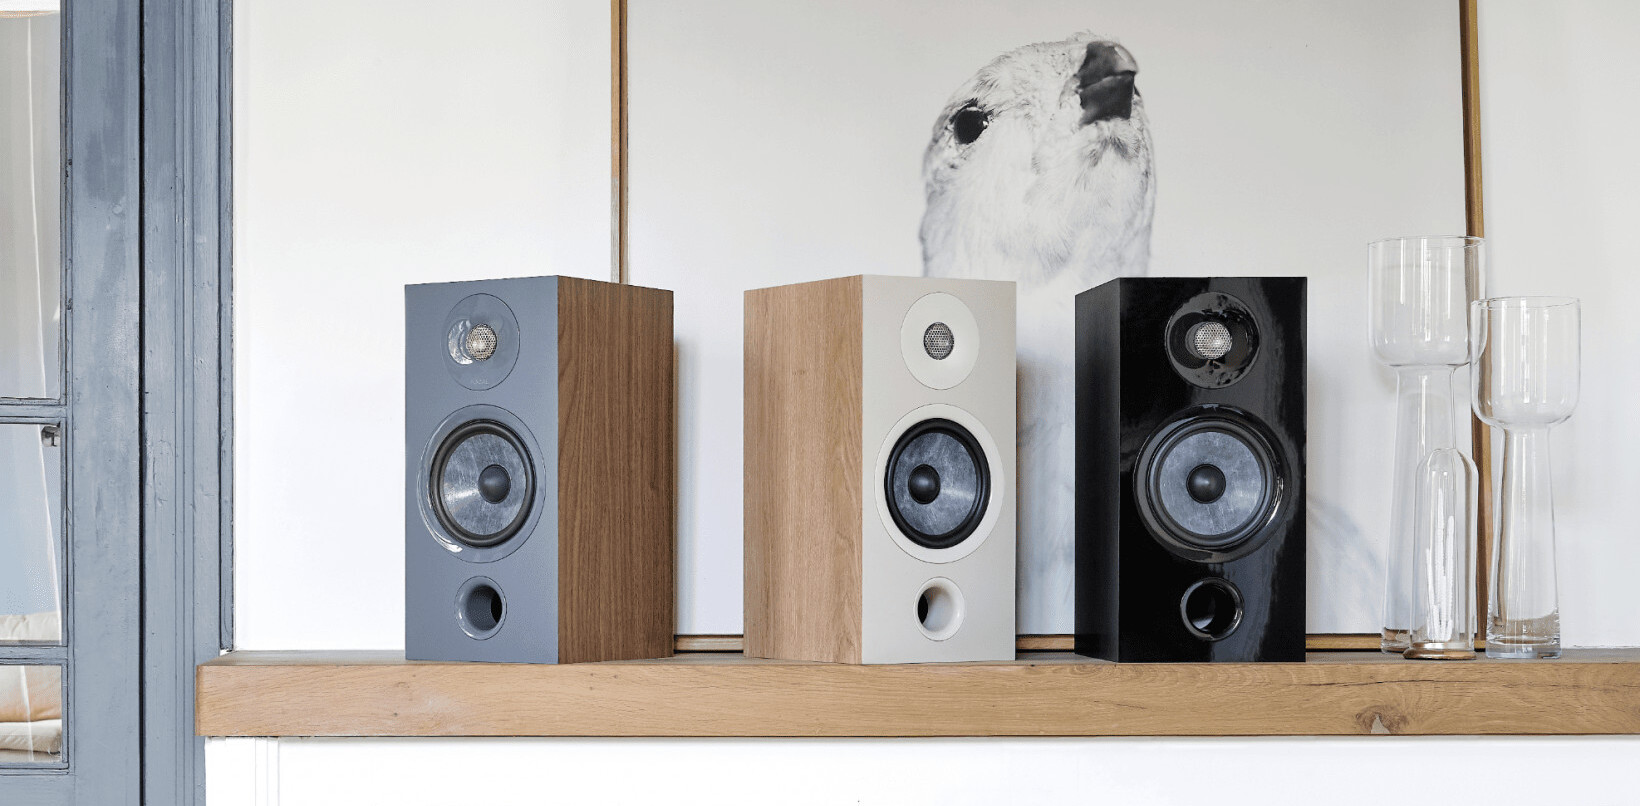 Focal’s new Chora speakers use recycled carbon fiber at accessible prices